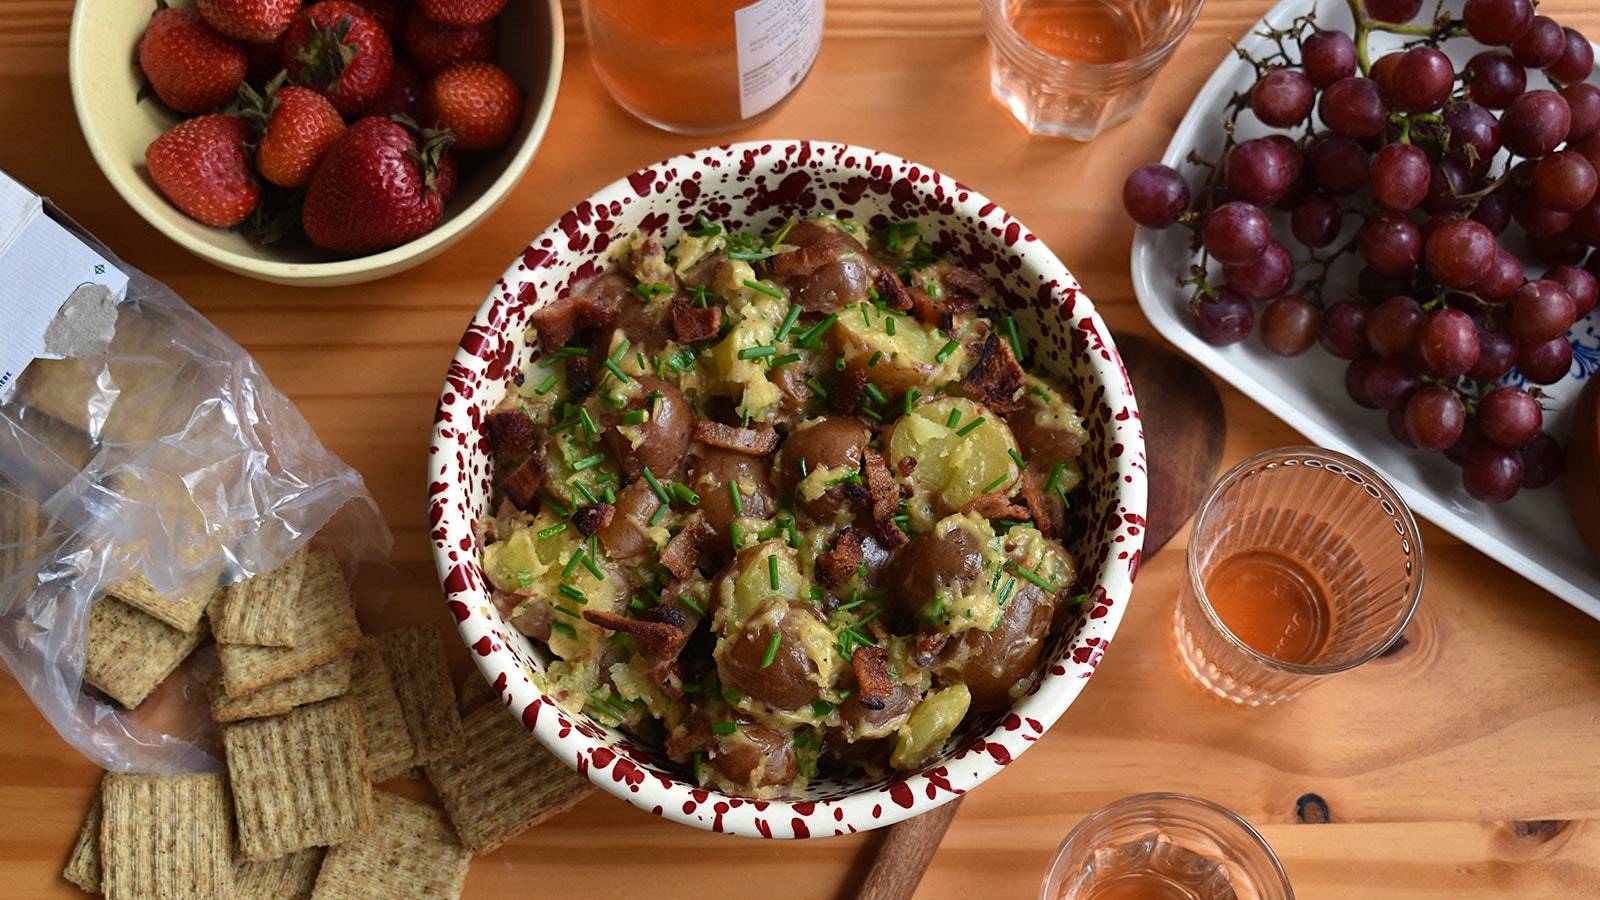  A bowl of potato salad beside glasses of pink wine, crackers, strawberries and grapes